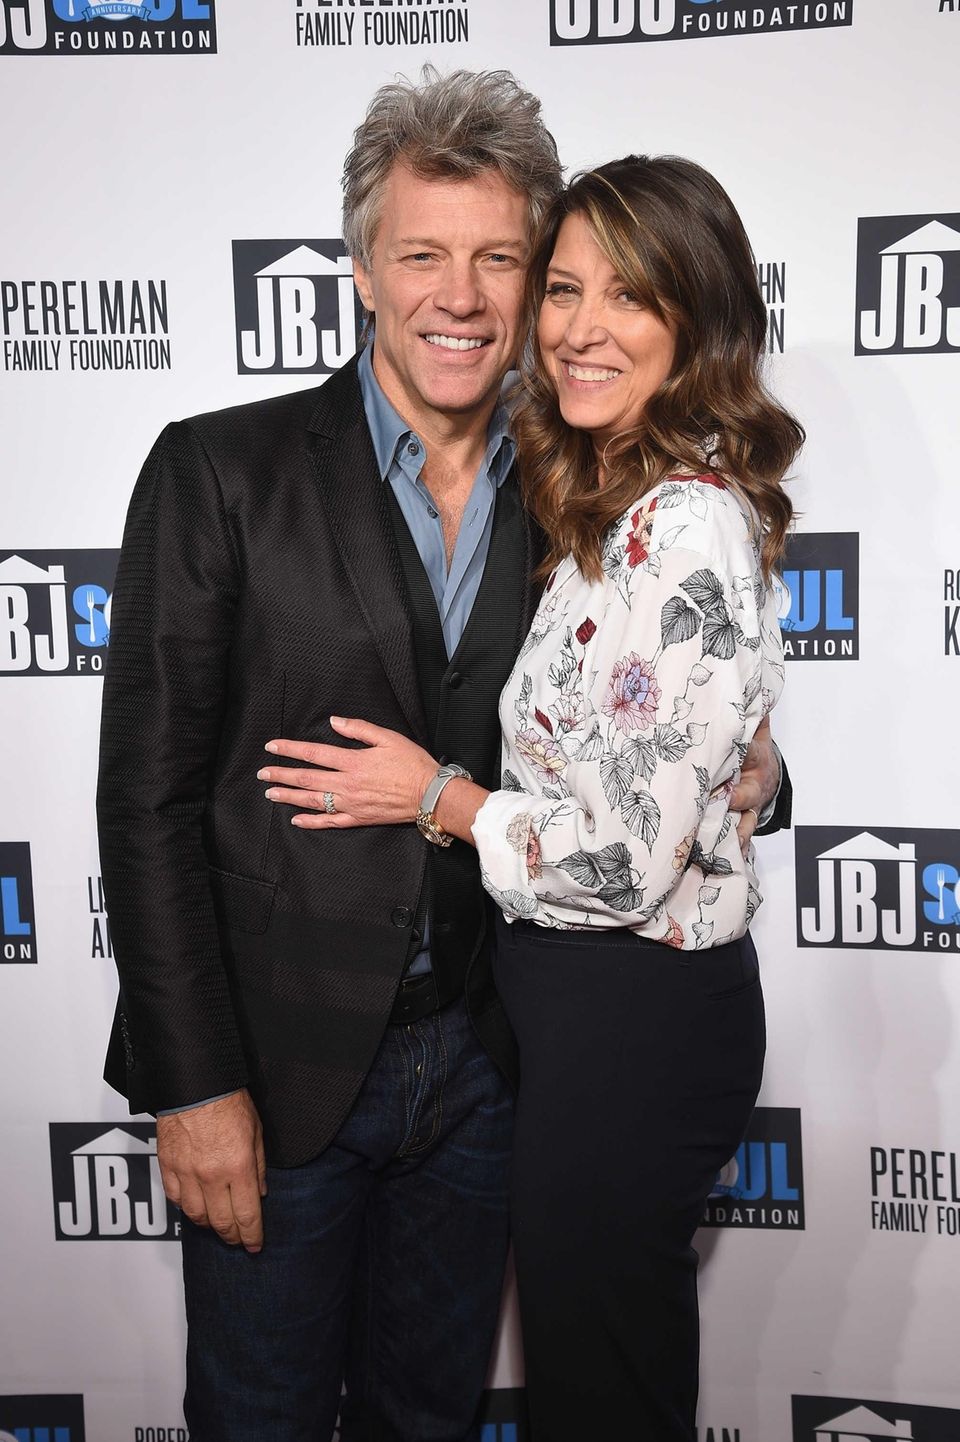 YEARS OF MARRIAGE: 27Bon Jovi, 54, may be